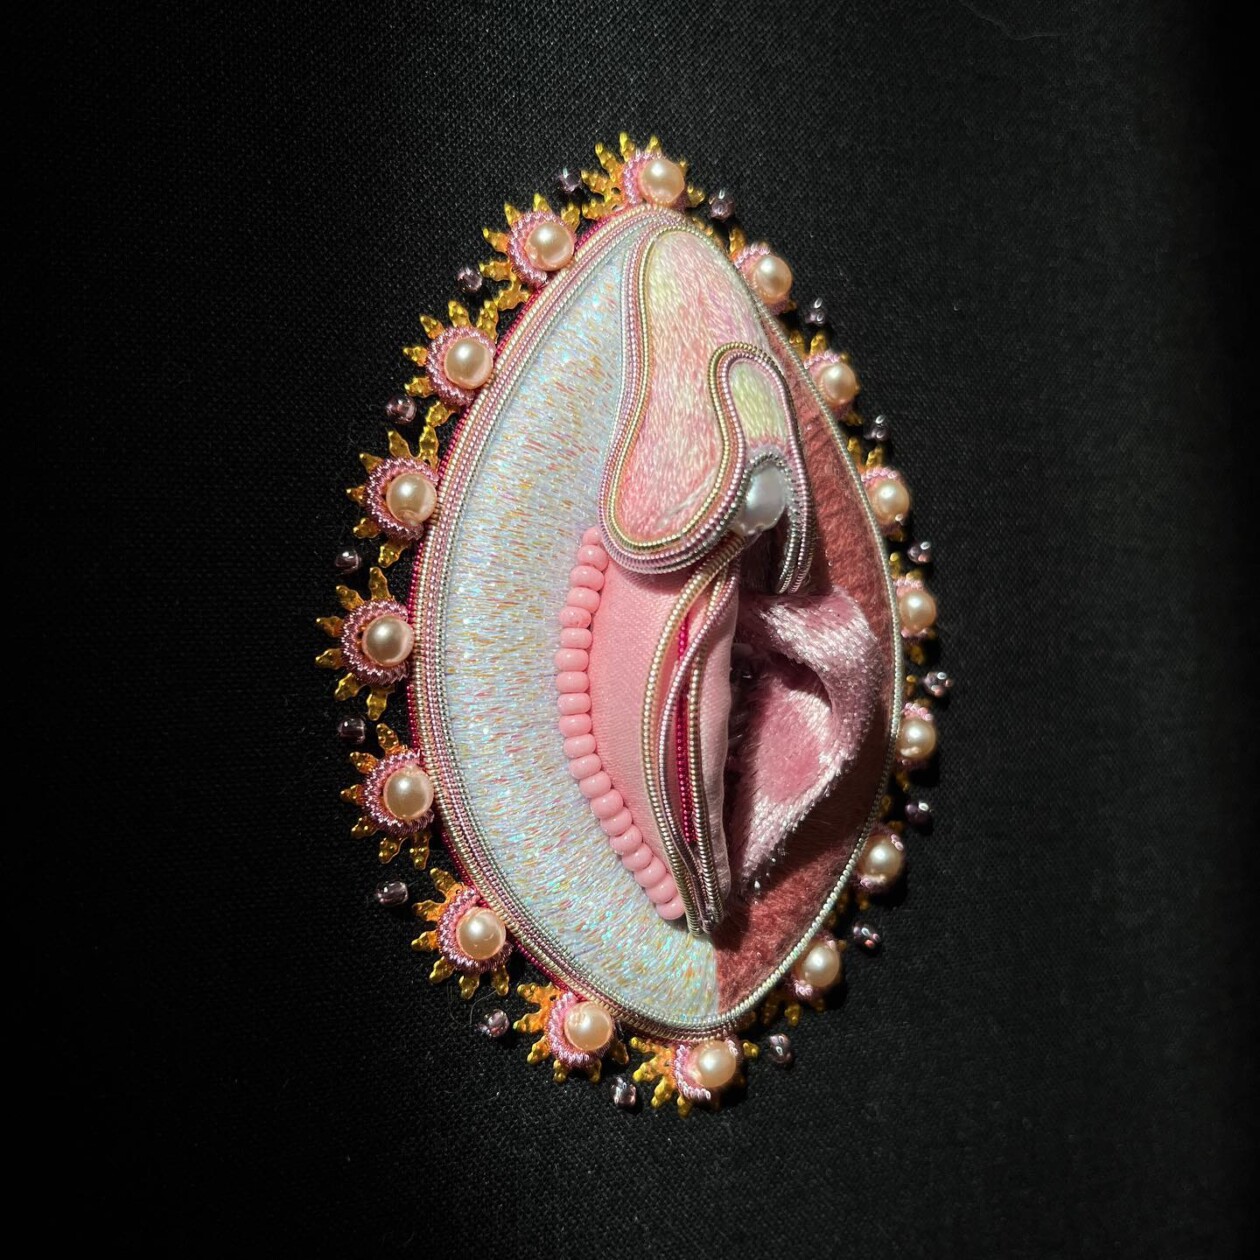 The Exquisite Embroidery And Bead Sculptures Of Studio Over And Out (5)